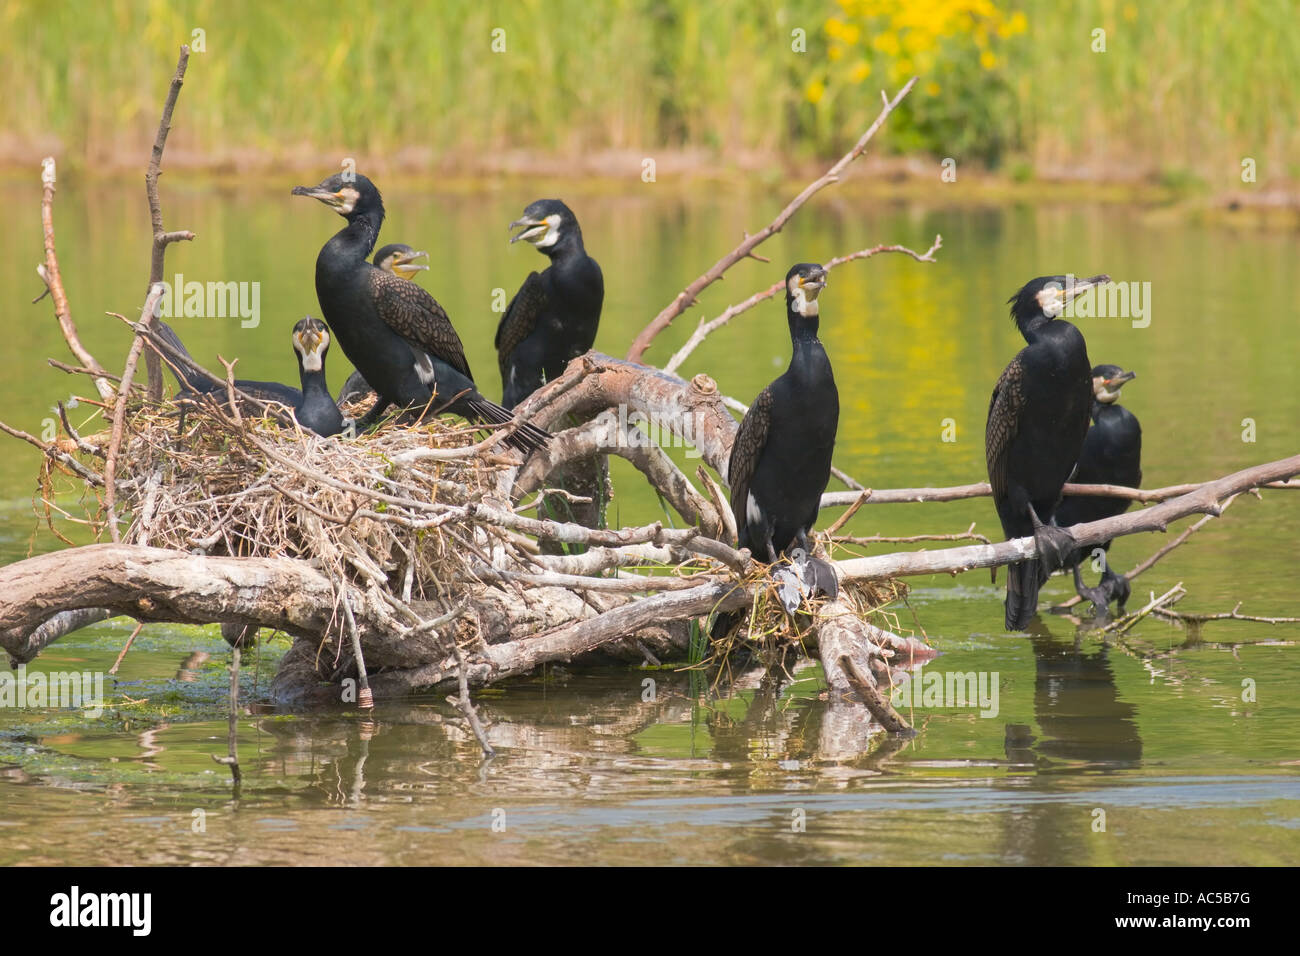 Seven great cormorants (Phalacrocorax carbo) sitting at a nest above a pond Stock Photo